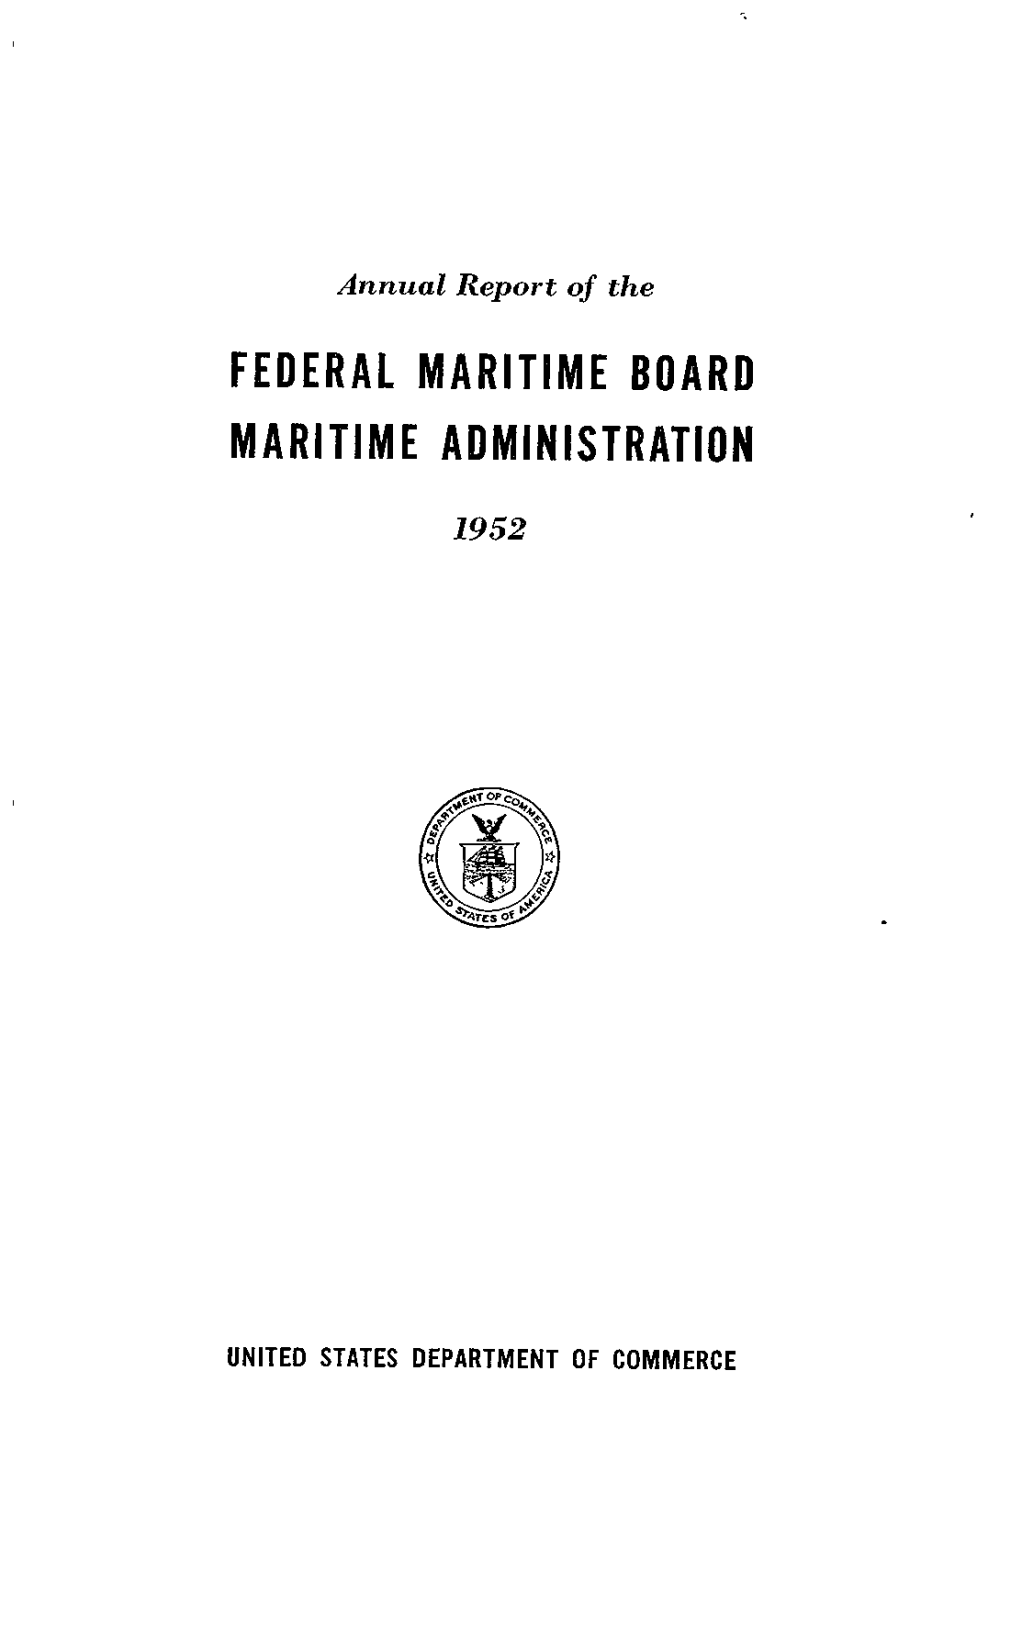 Annual Report for Fiscal Year 1952